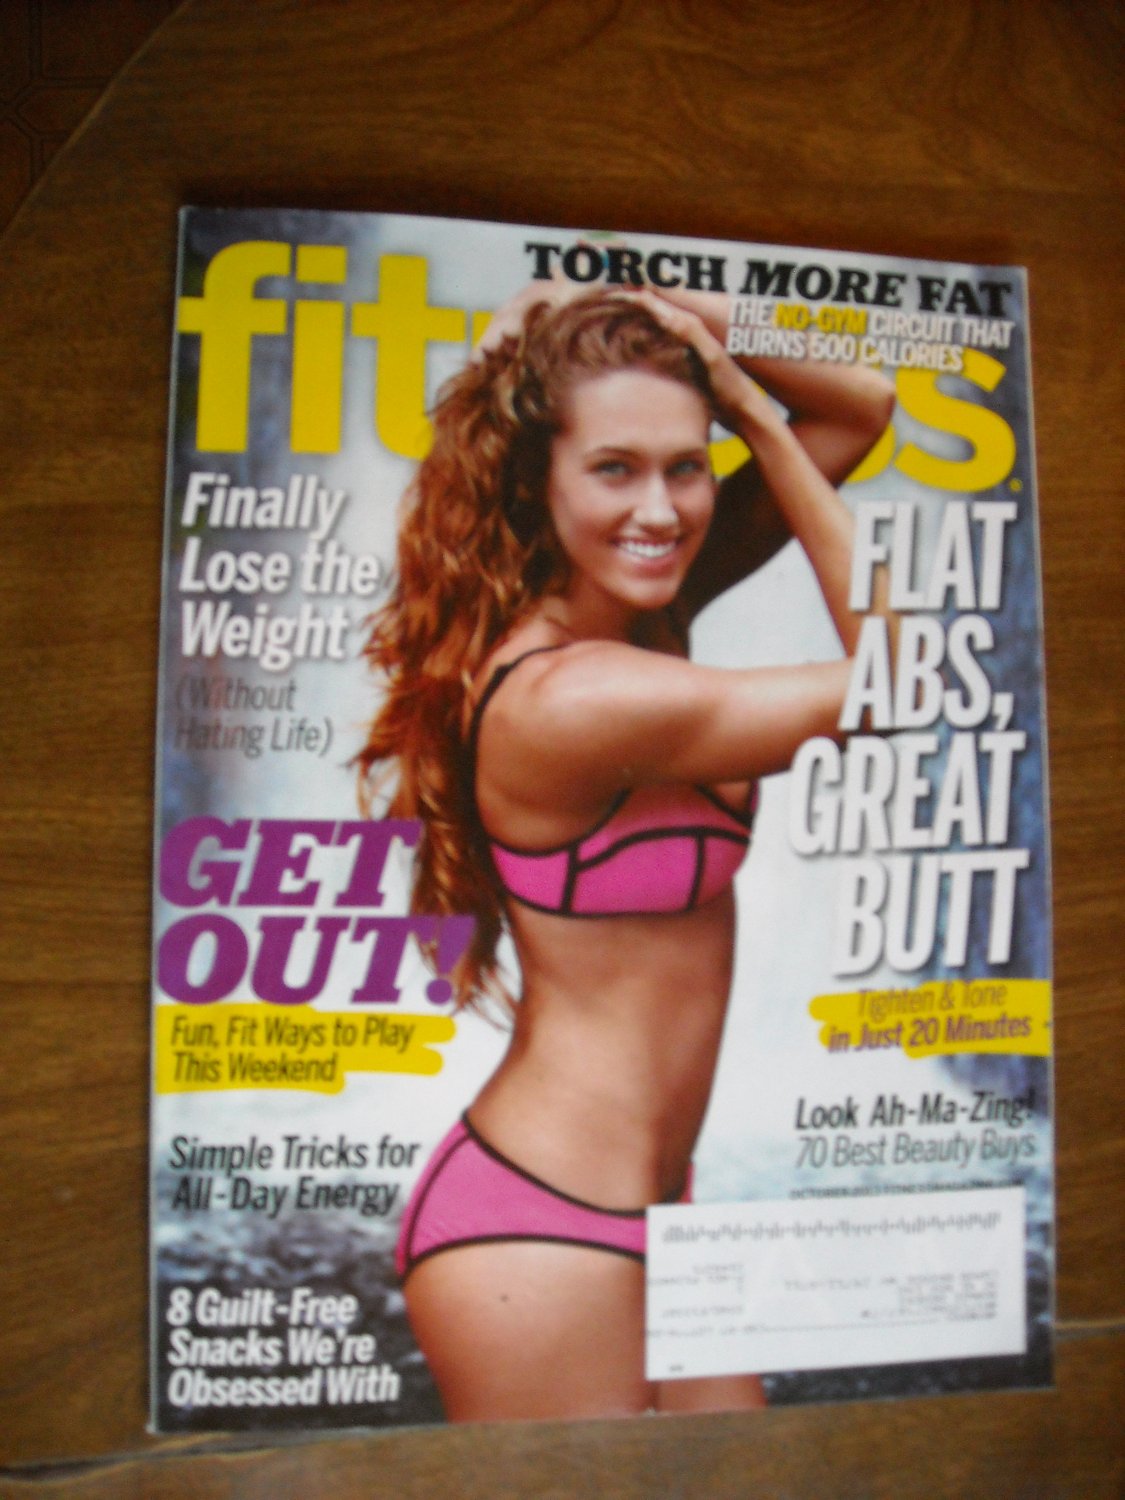 Fitness Magazine Flat Abs, Great Butt October 2013 Issue 9 Tighten and Tone All Day Energy (G1)